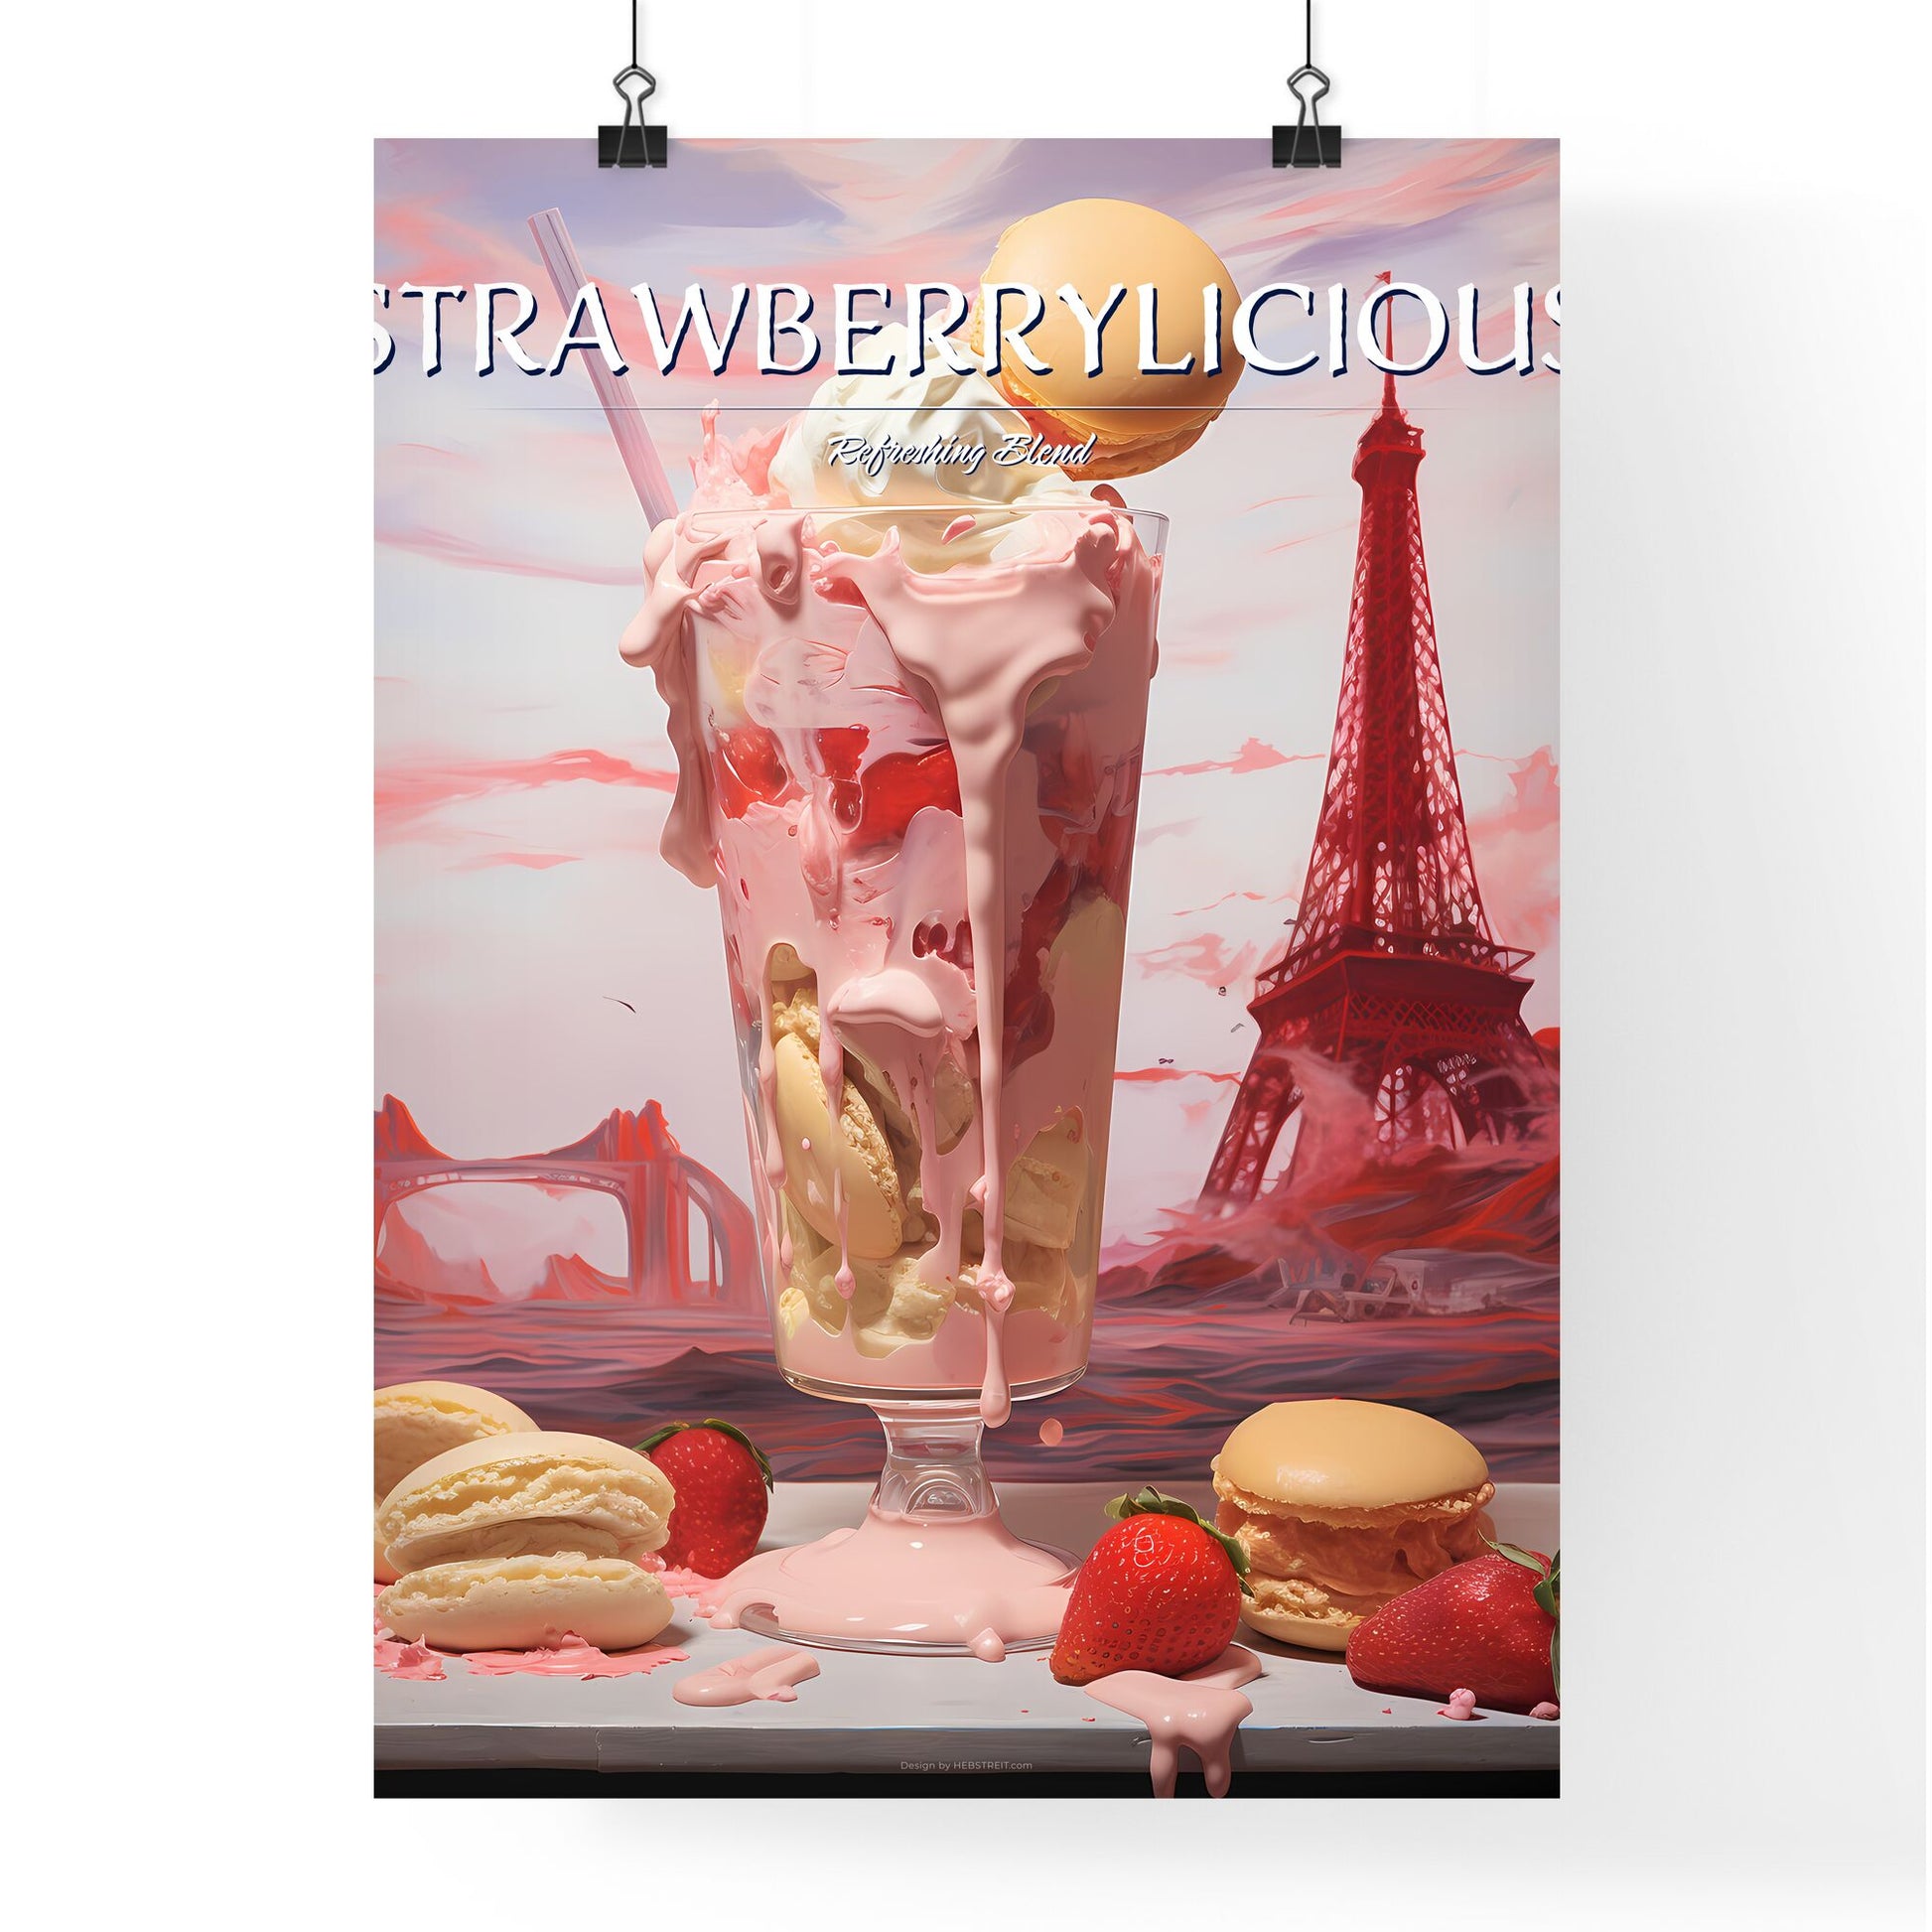 A Poster of strawberry milkshake - A Pink Milkshake With A Straw And A Tower In The Background Default Title